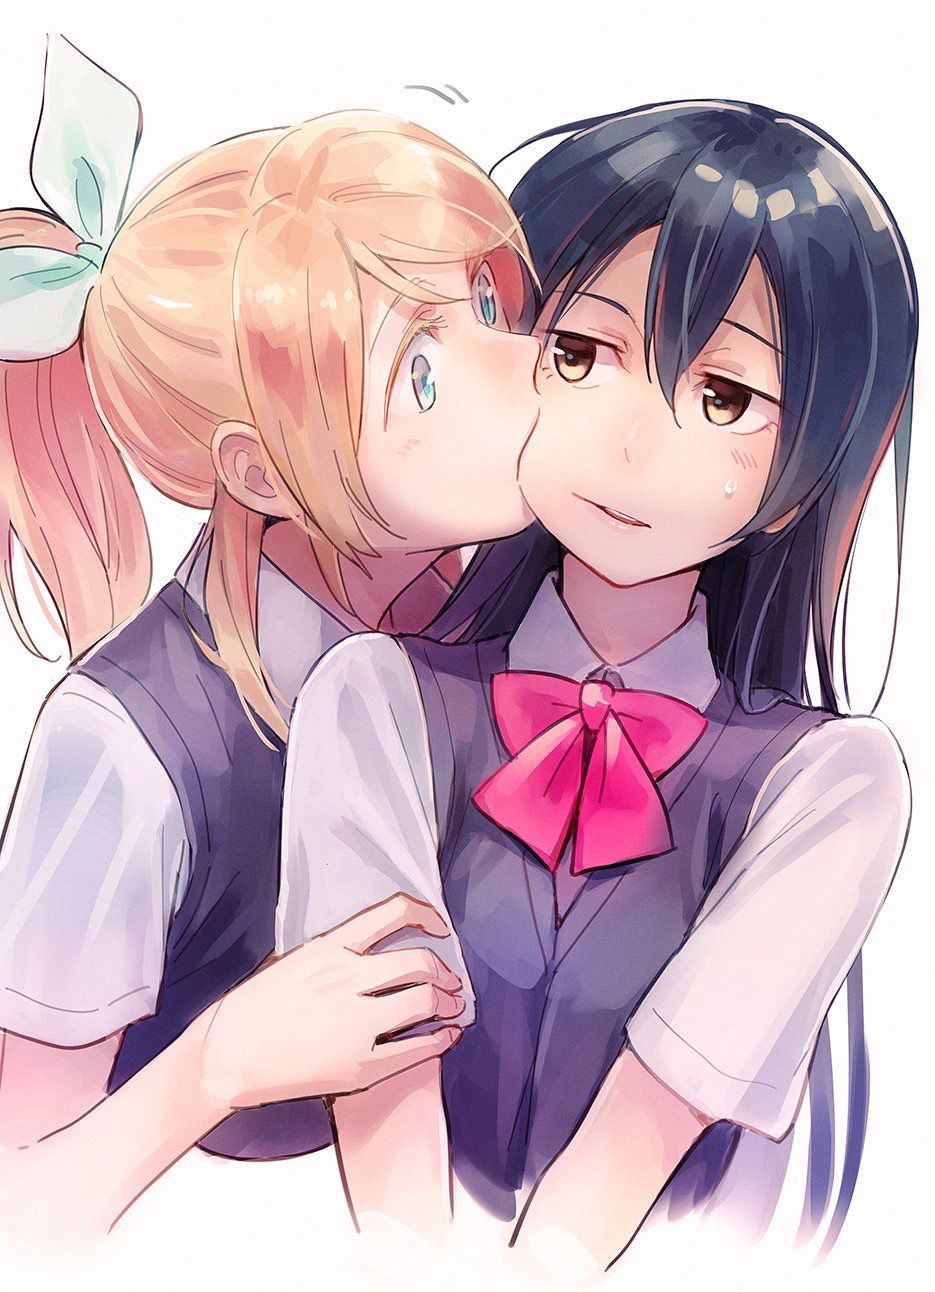 Erotic images that can be felt the good of Yuri and lesbian 2